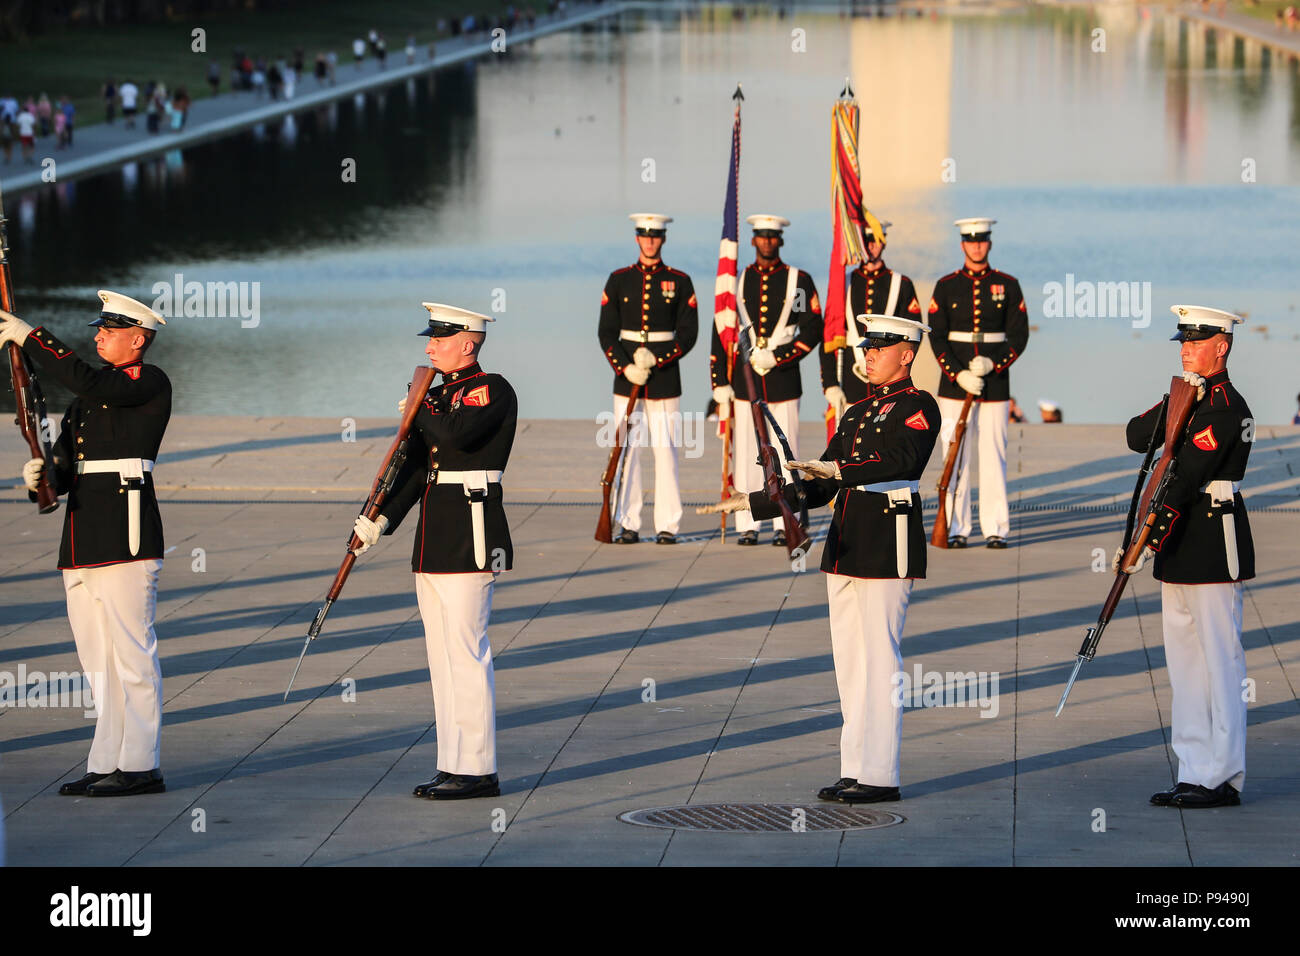 Marines with the U.S. Marine Corps Silent Drill Platoon execute precision rifle drill movements during a Tuesday Sunset Parade at the Lincoln Memorial, Washington D.C., July 10, 2018. The guest of honor for the parade was the former Vice President of the U.S., Joe Biden, and the hosting official was the Staff Judge Advocate to the Commandant of the Marine Corps, Maj. Gen. John R. Ewers Jr. (Official Marine Corps photo by Cpl. Damon Mclean/Released) Stock Photo